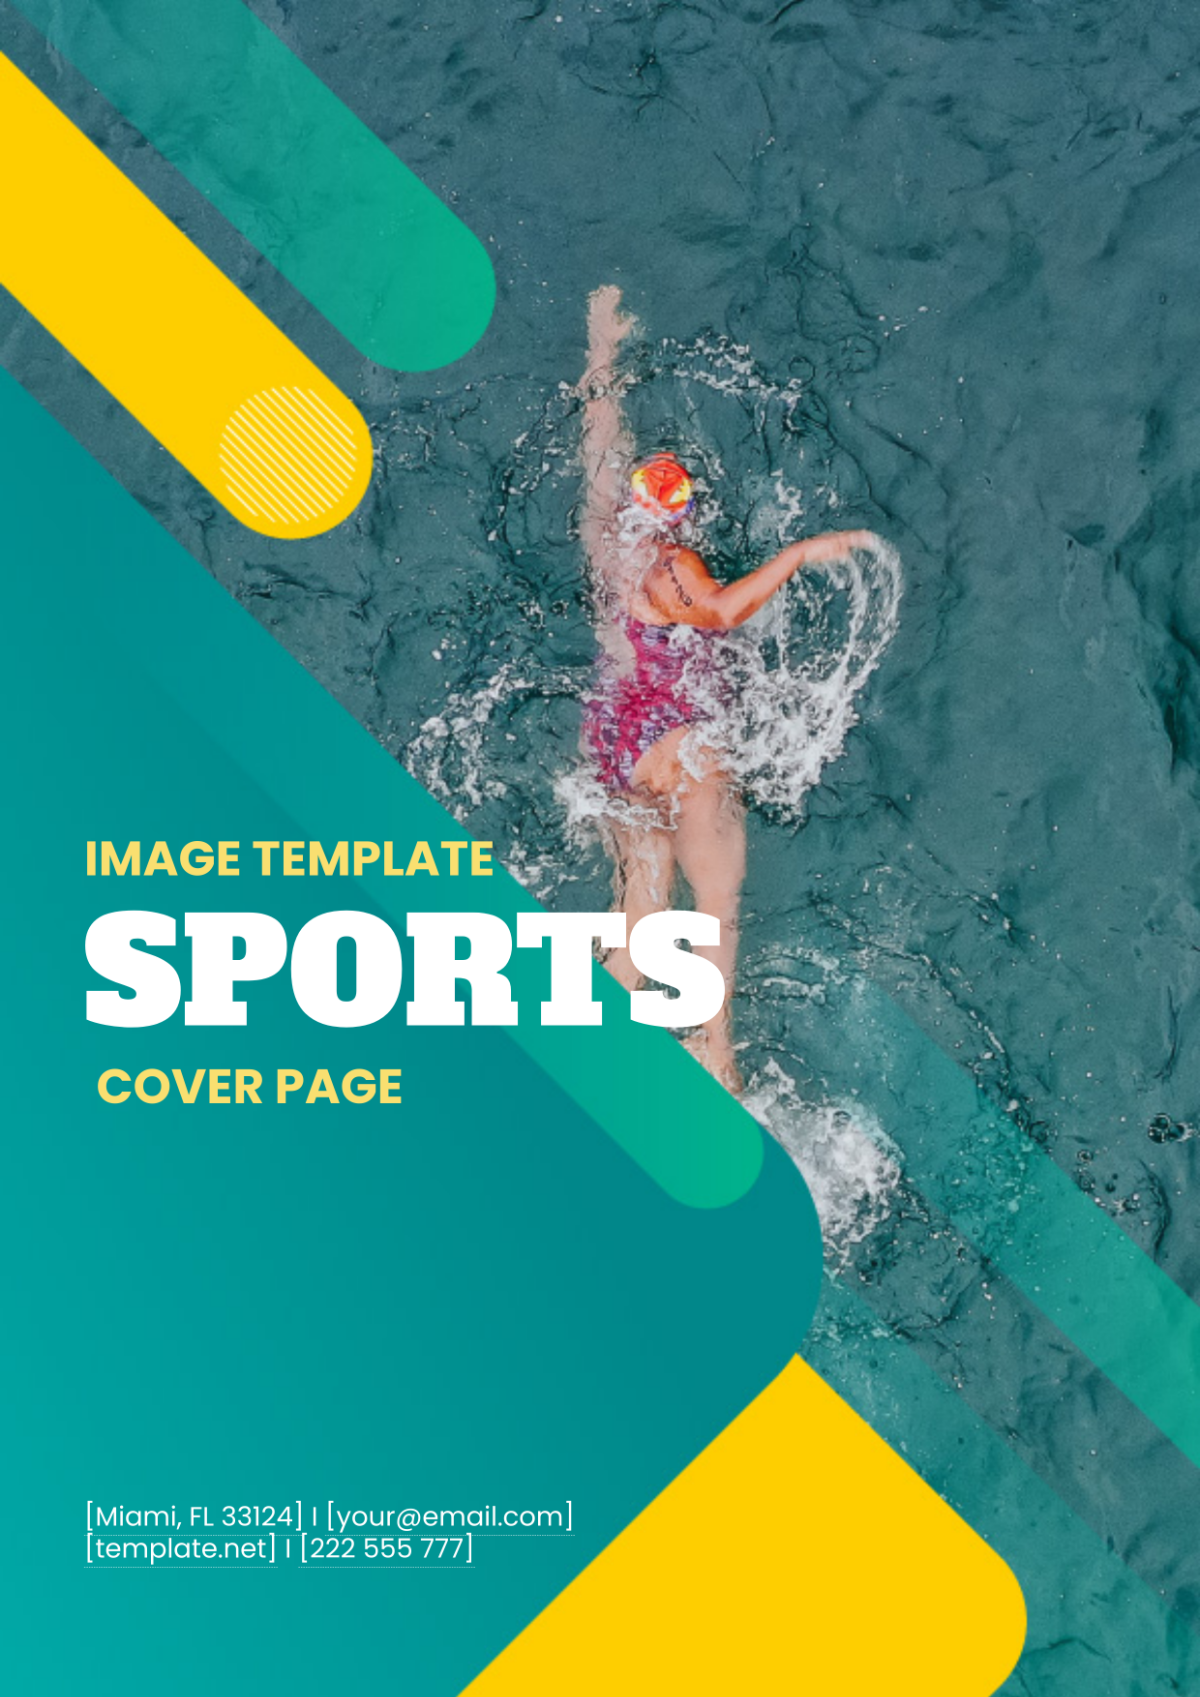 Free Sports Cover Page Image Template